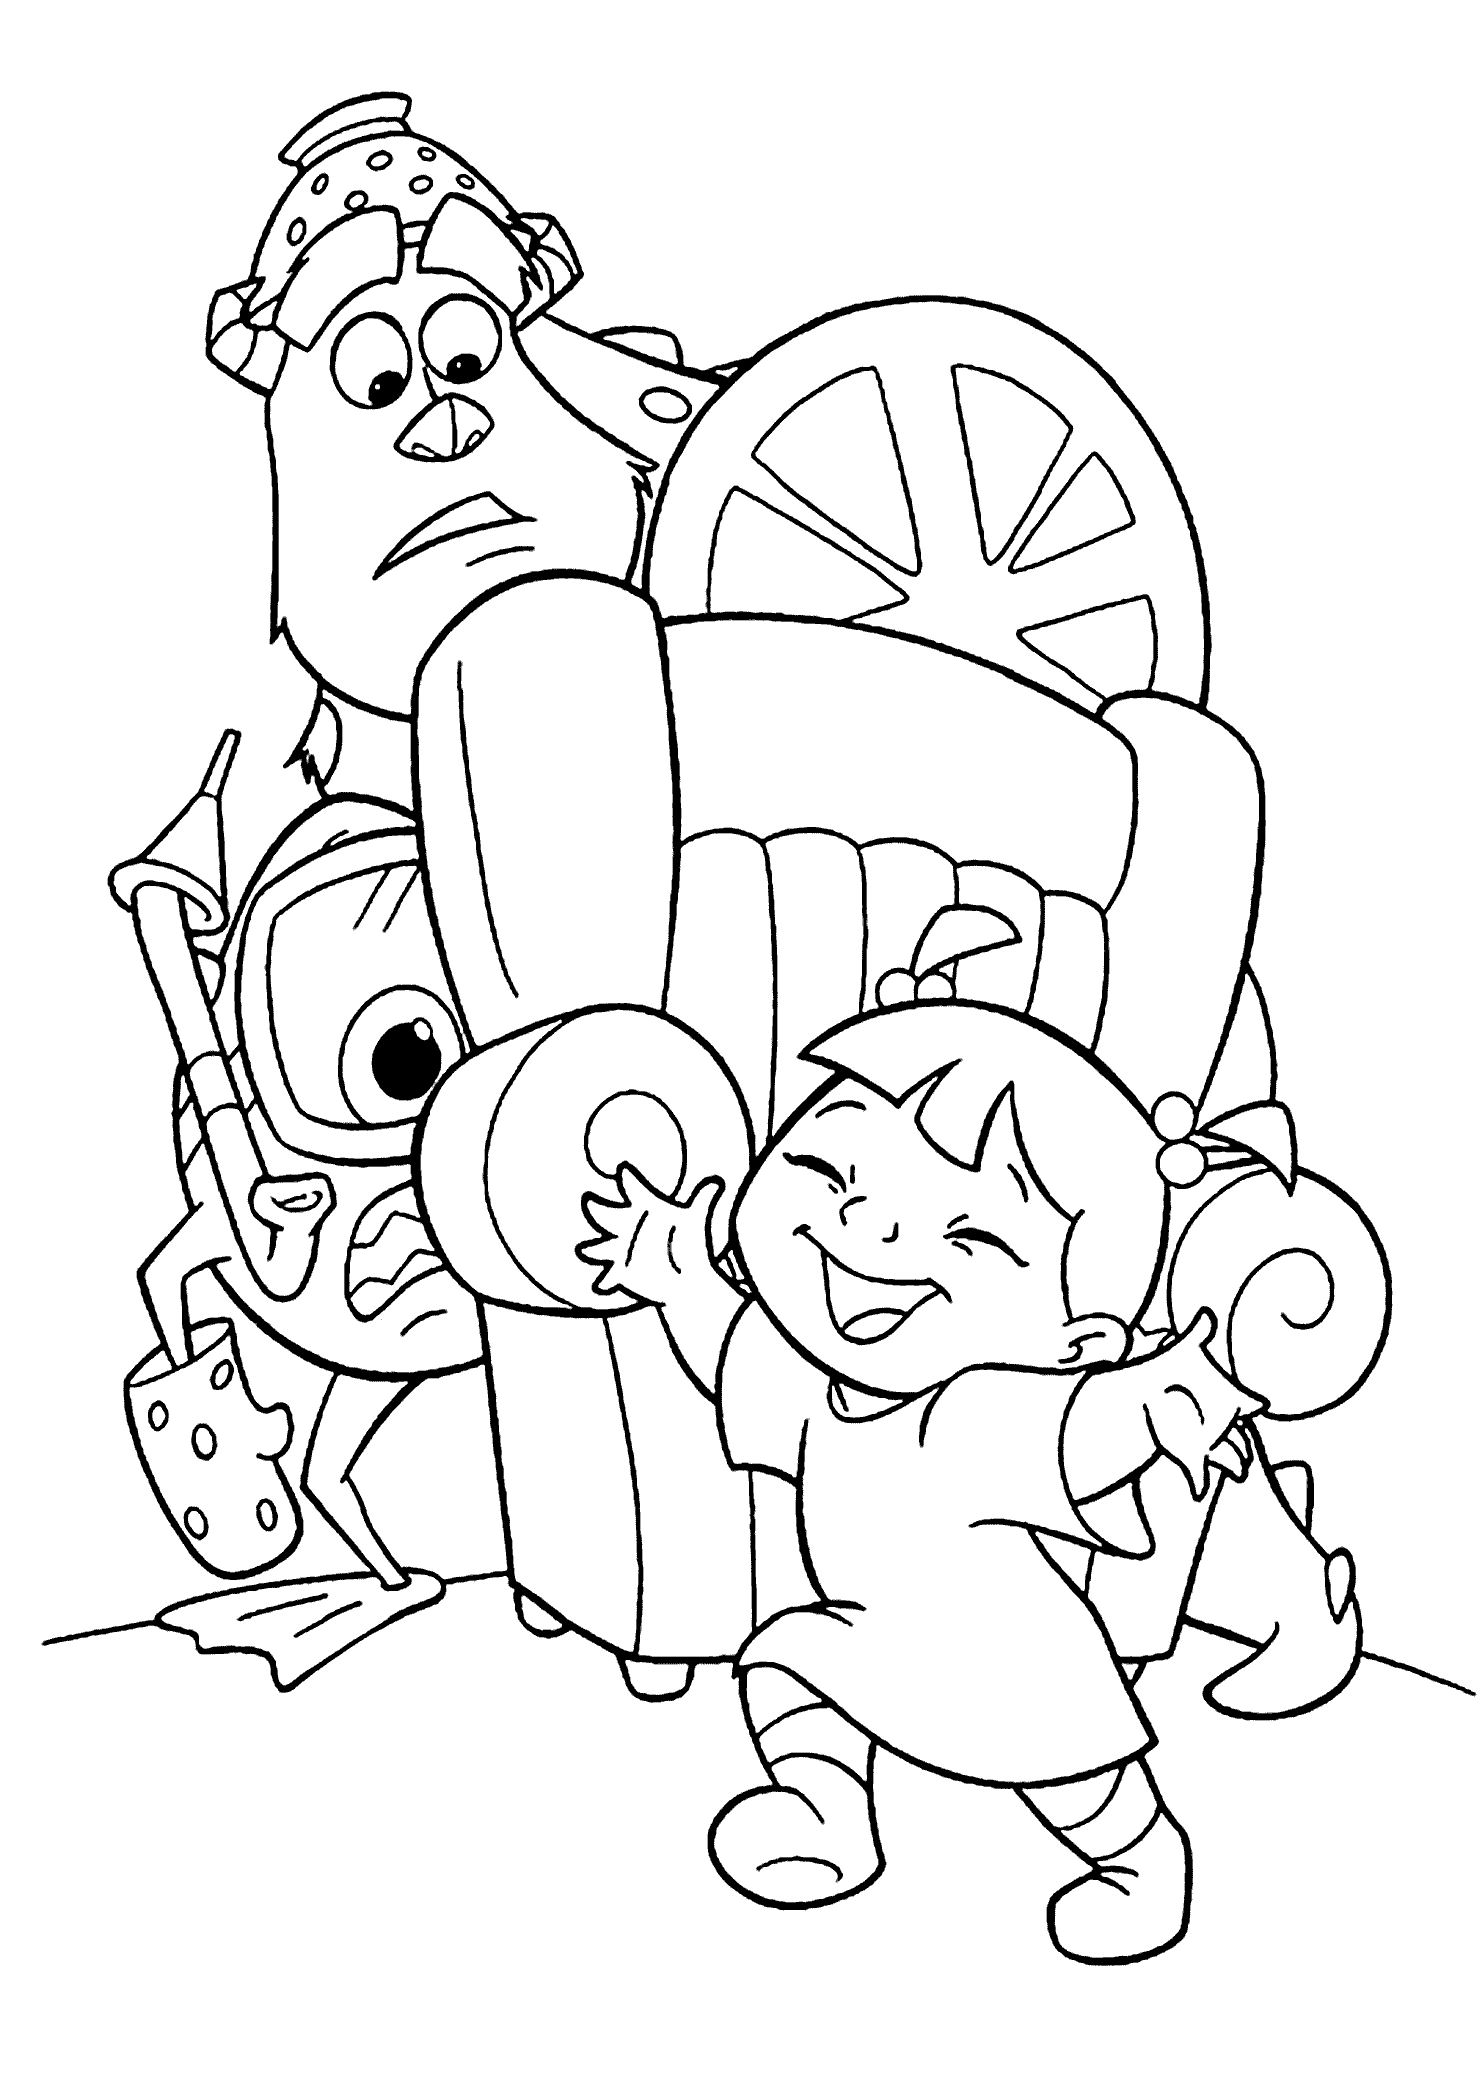 monster inc coloring pages monster inc cartoon coloring pages for kids printable monster inc coloring pages 